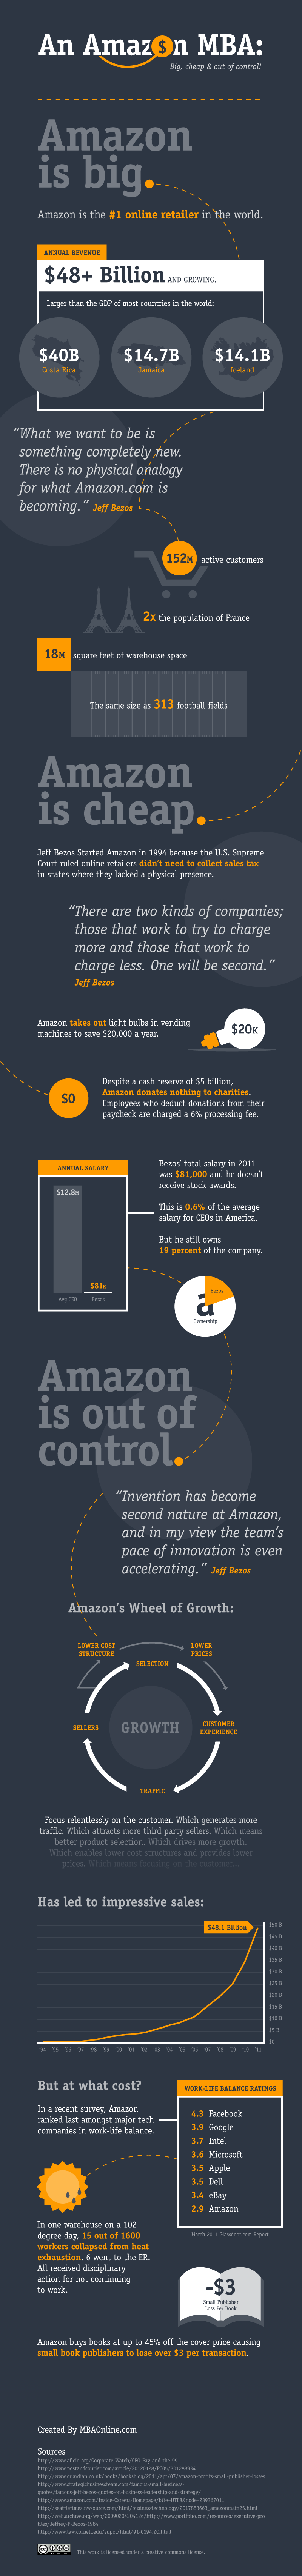 Amazon – The Inside Story [Infographic]